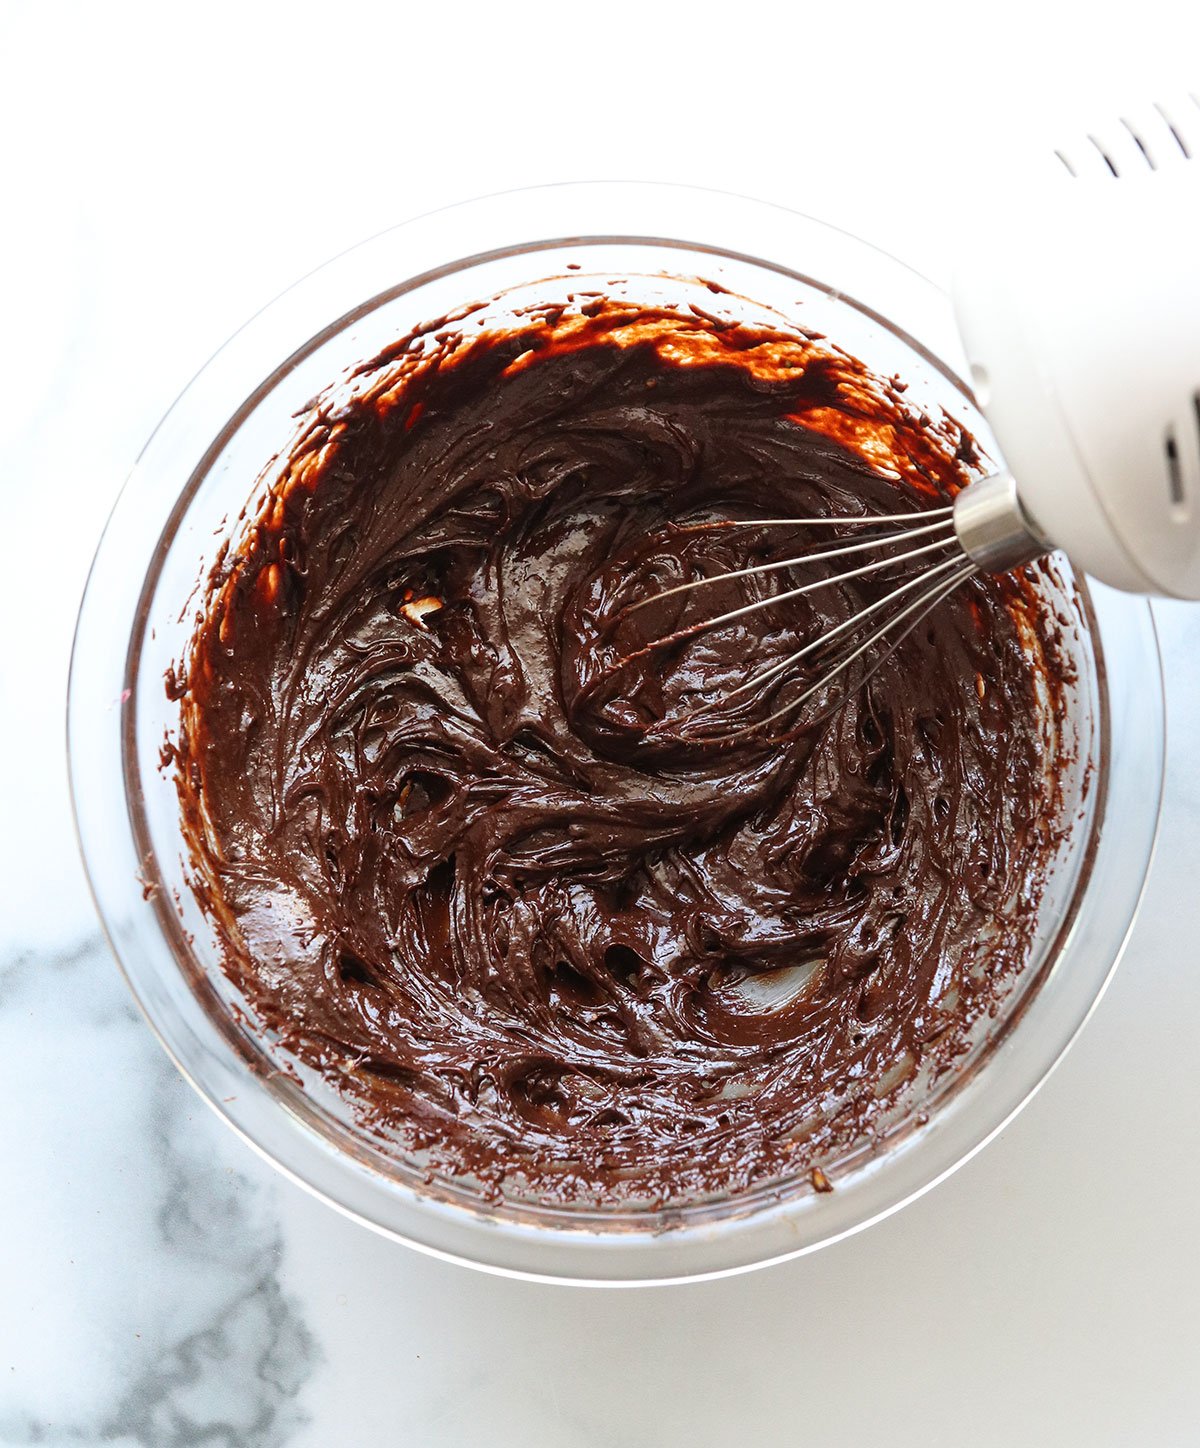 avocado mixed with melted chocolate using an electric hand mixer.